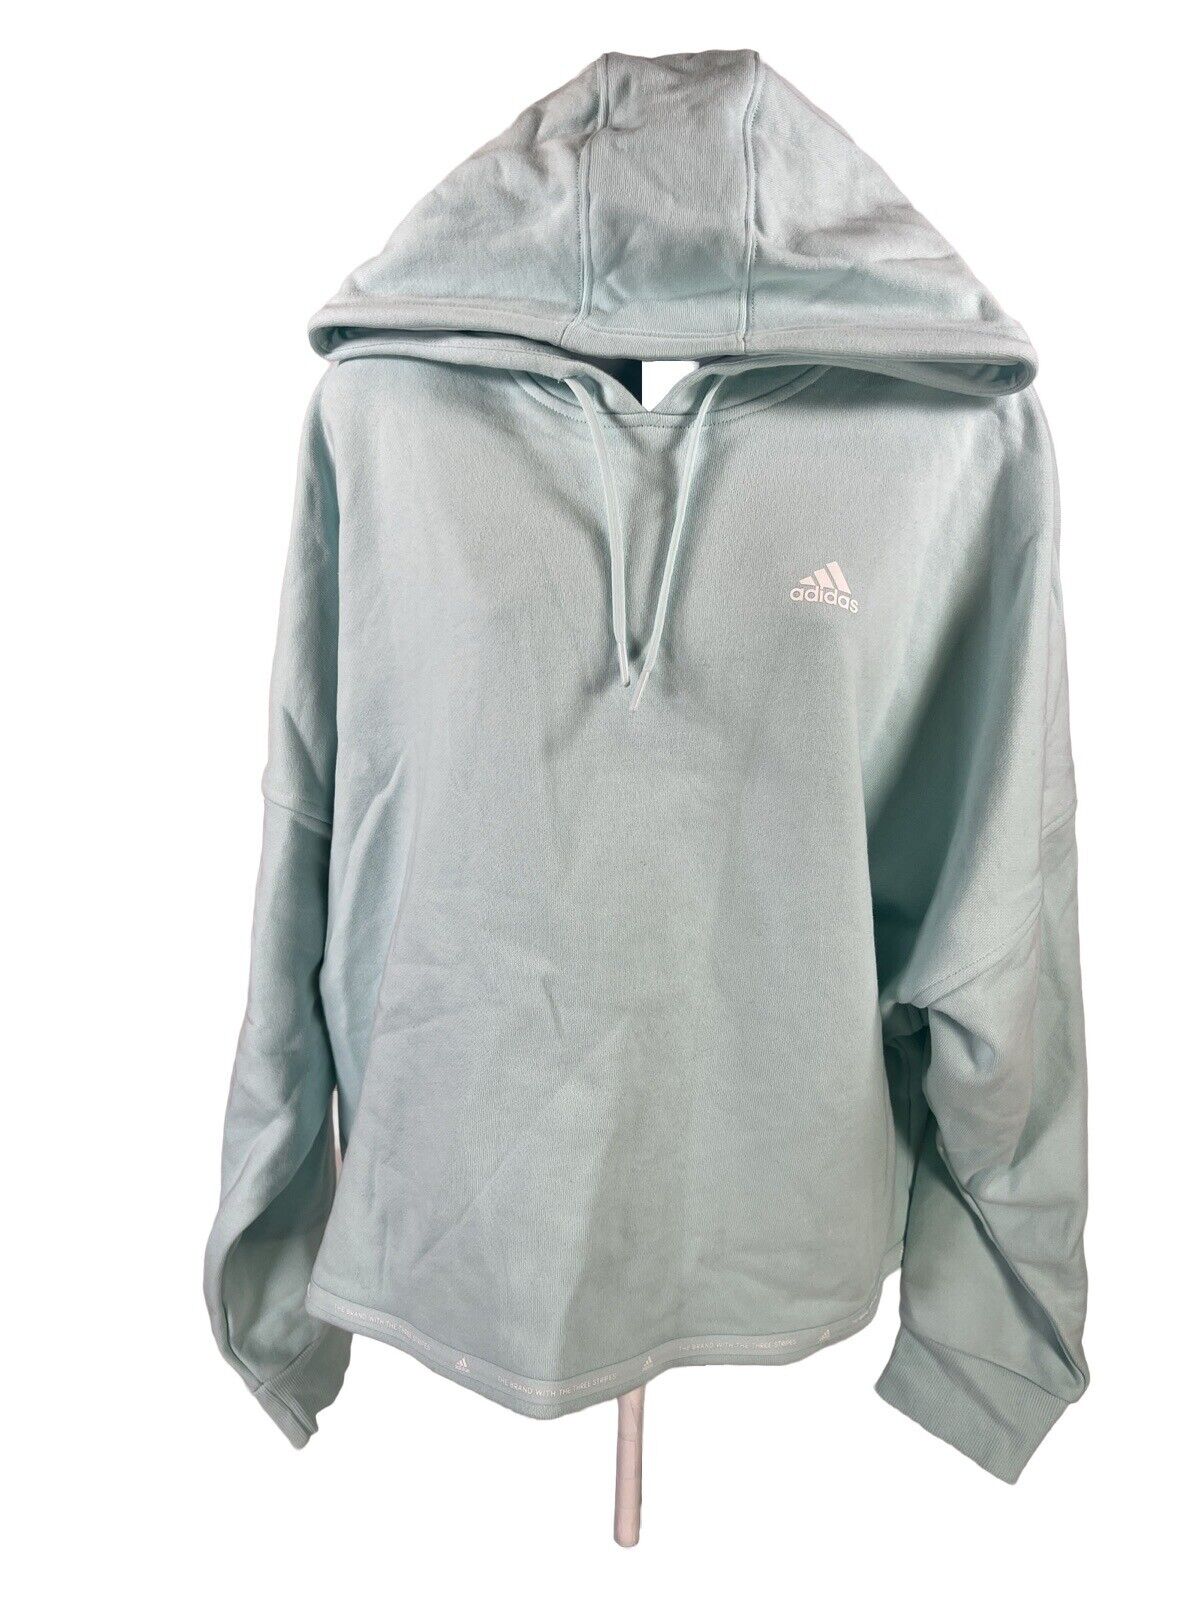 NEW adidas Women's Blue Crop Fit Pullover Hoodie - S